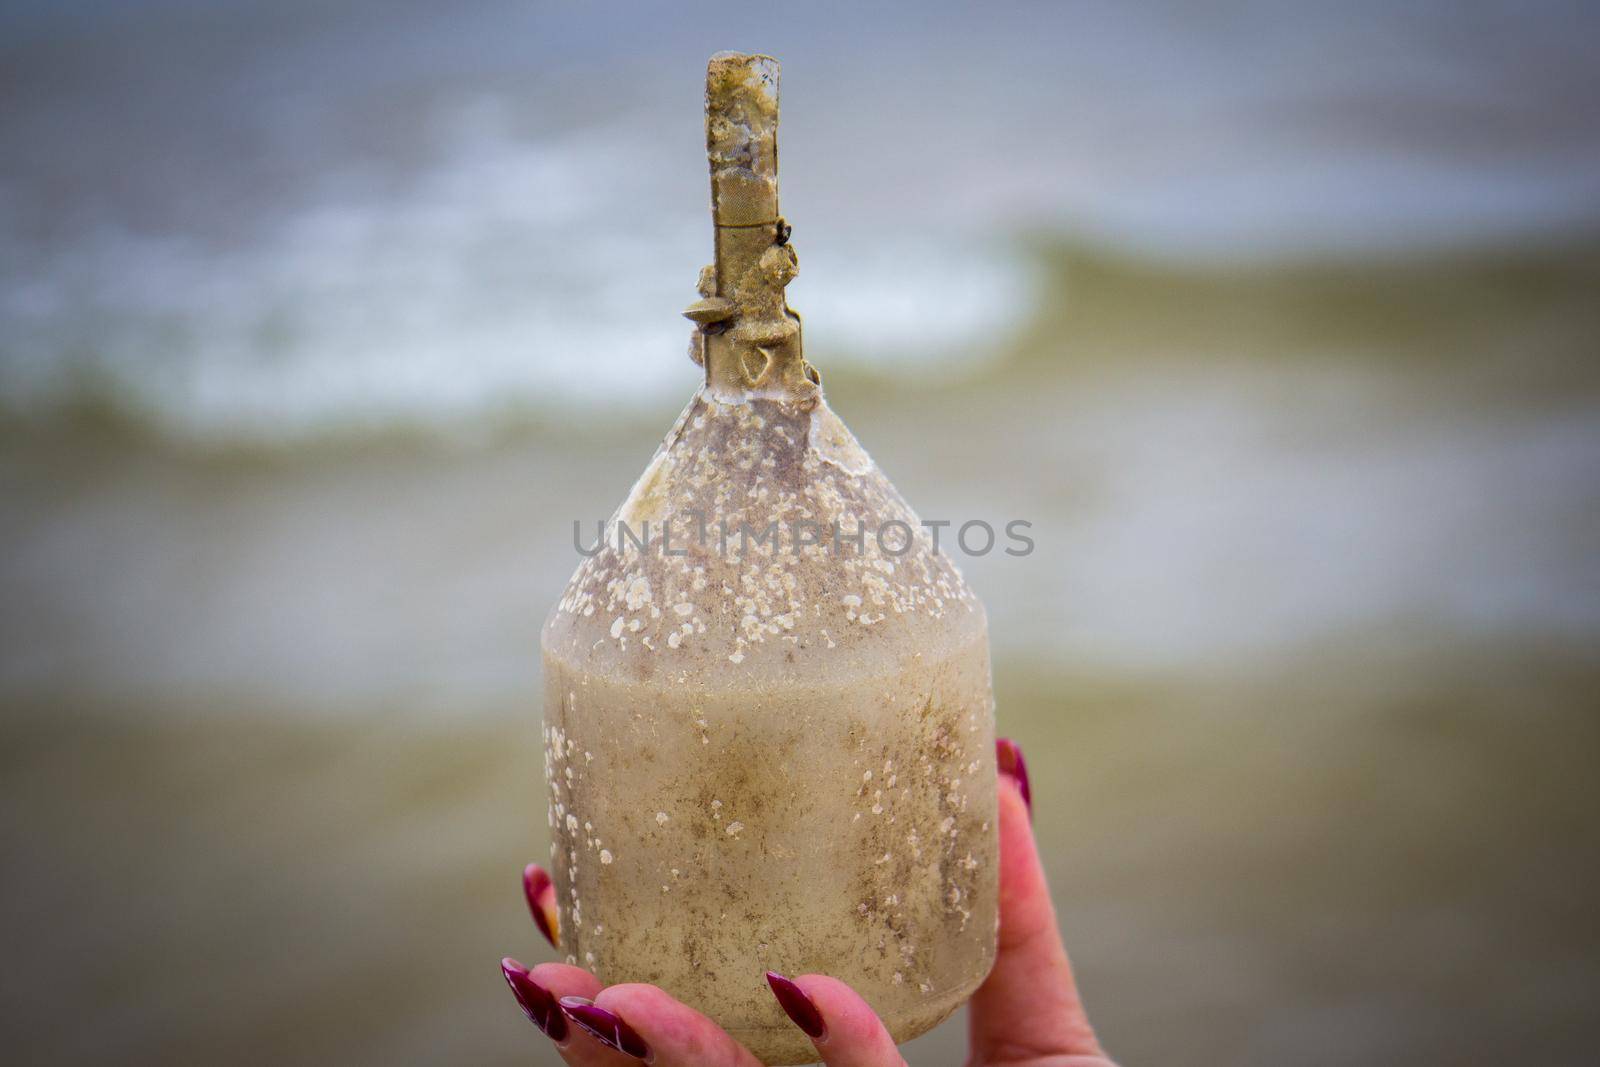 Real old bottle found on Baltic coast